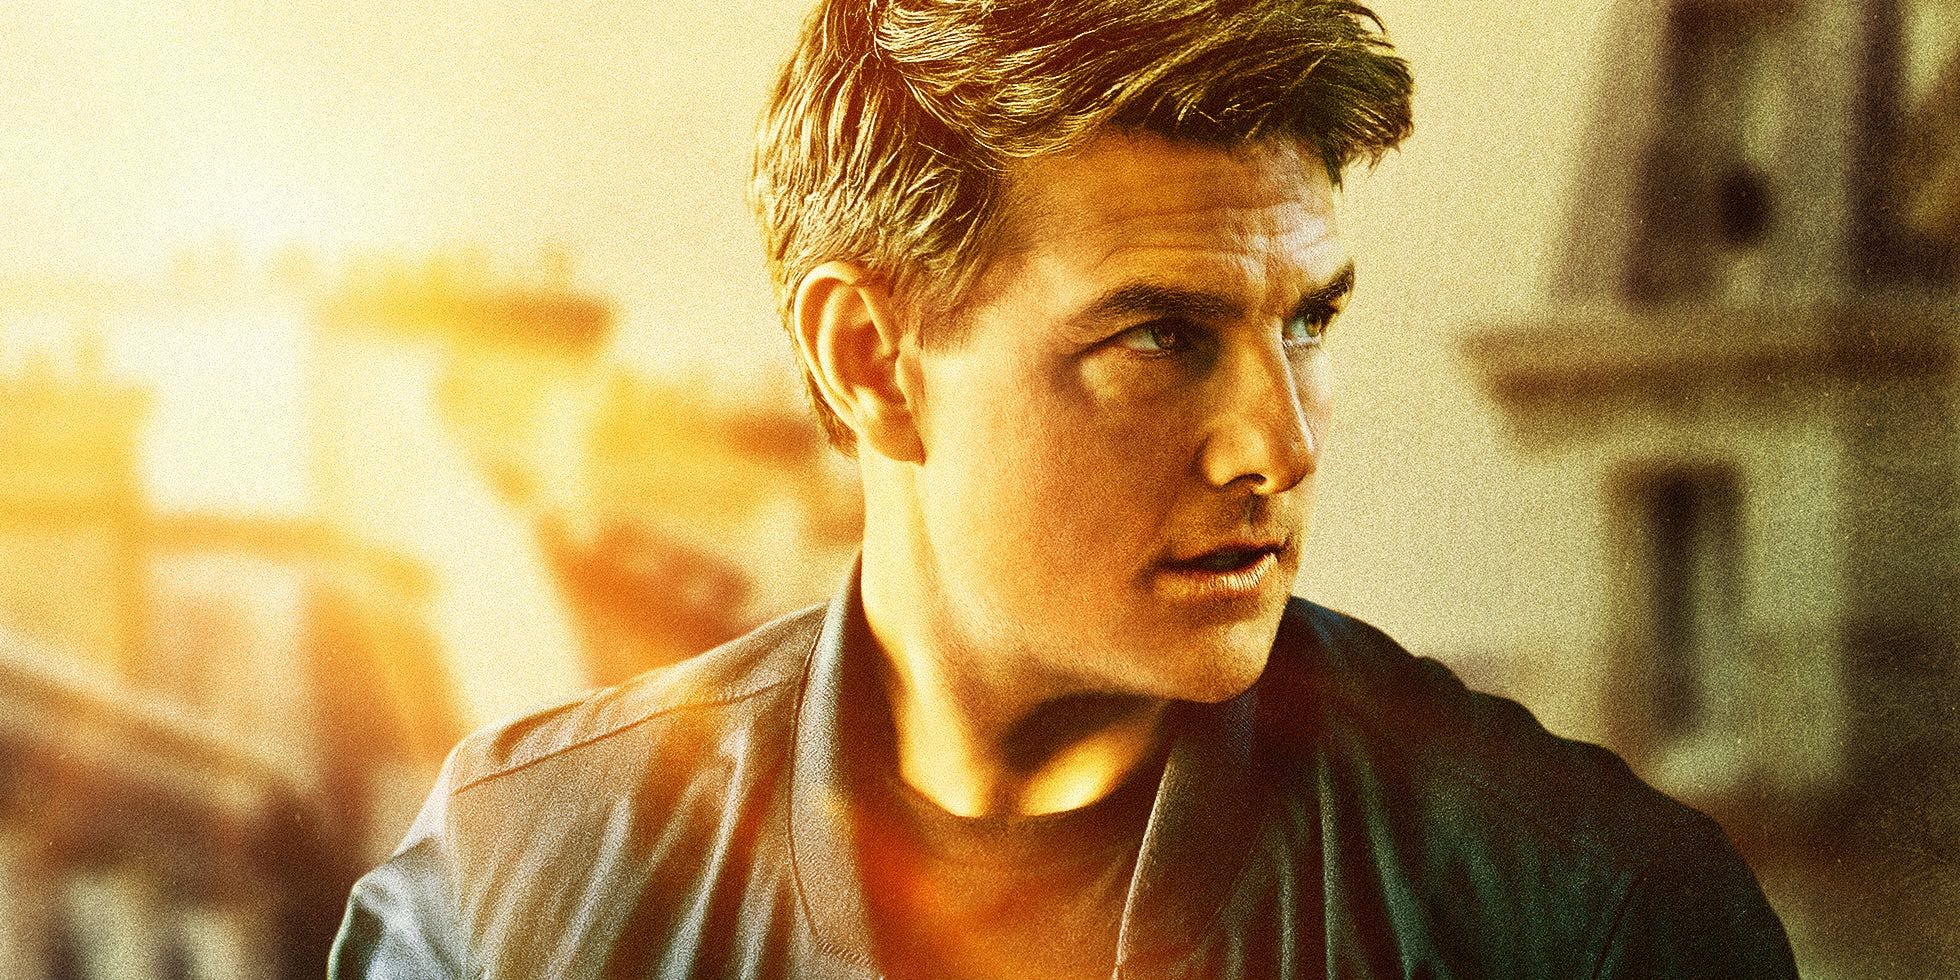 mission-impossible-fallout-character-posters-tom-cruise.jpg